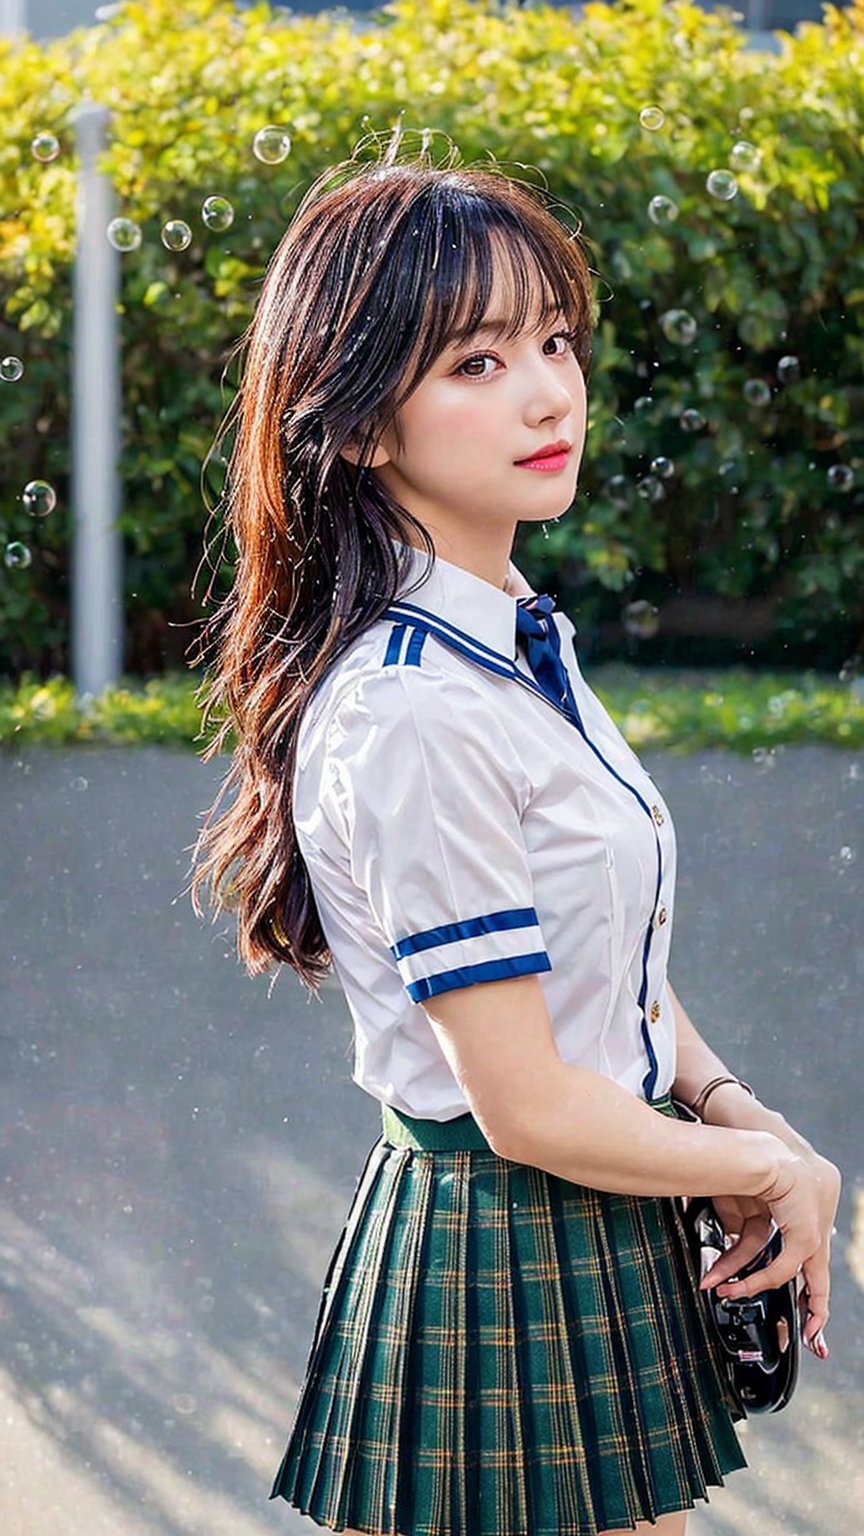 (((masterpiece))), (((best quality))), Best picture quality, high resolution, 8k, realistic, sharp focus, realistic image of elegant lady, Korean beauty, supermodel, girl, standing, wearing short-sleeved school uniform, dark-colored skirt, pleated skirt with tartan pattern, bubble socks, student shoes, light brown hair, long hair, green eyes, side-swept bangs, sideburns, phone, (wet body:1.0), sunlight, sweat, a dog, helf body, shoes removed, Head tilt, untucked, Profile, (high quality:1.0) (white background:0.8), detailed face, (blush:1.0), 1 girl,Young beauty spirit, ZGirl, perfect light, Detailedface,1 girl, big eyes, eye shadow ,SharpEyess, 
,perfecteyes eyes ,Smirk,Detailedface,perfect light,ZGirl,dreaming_background,photo of perfecteyes eyes,